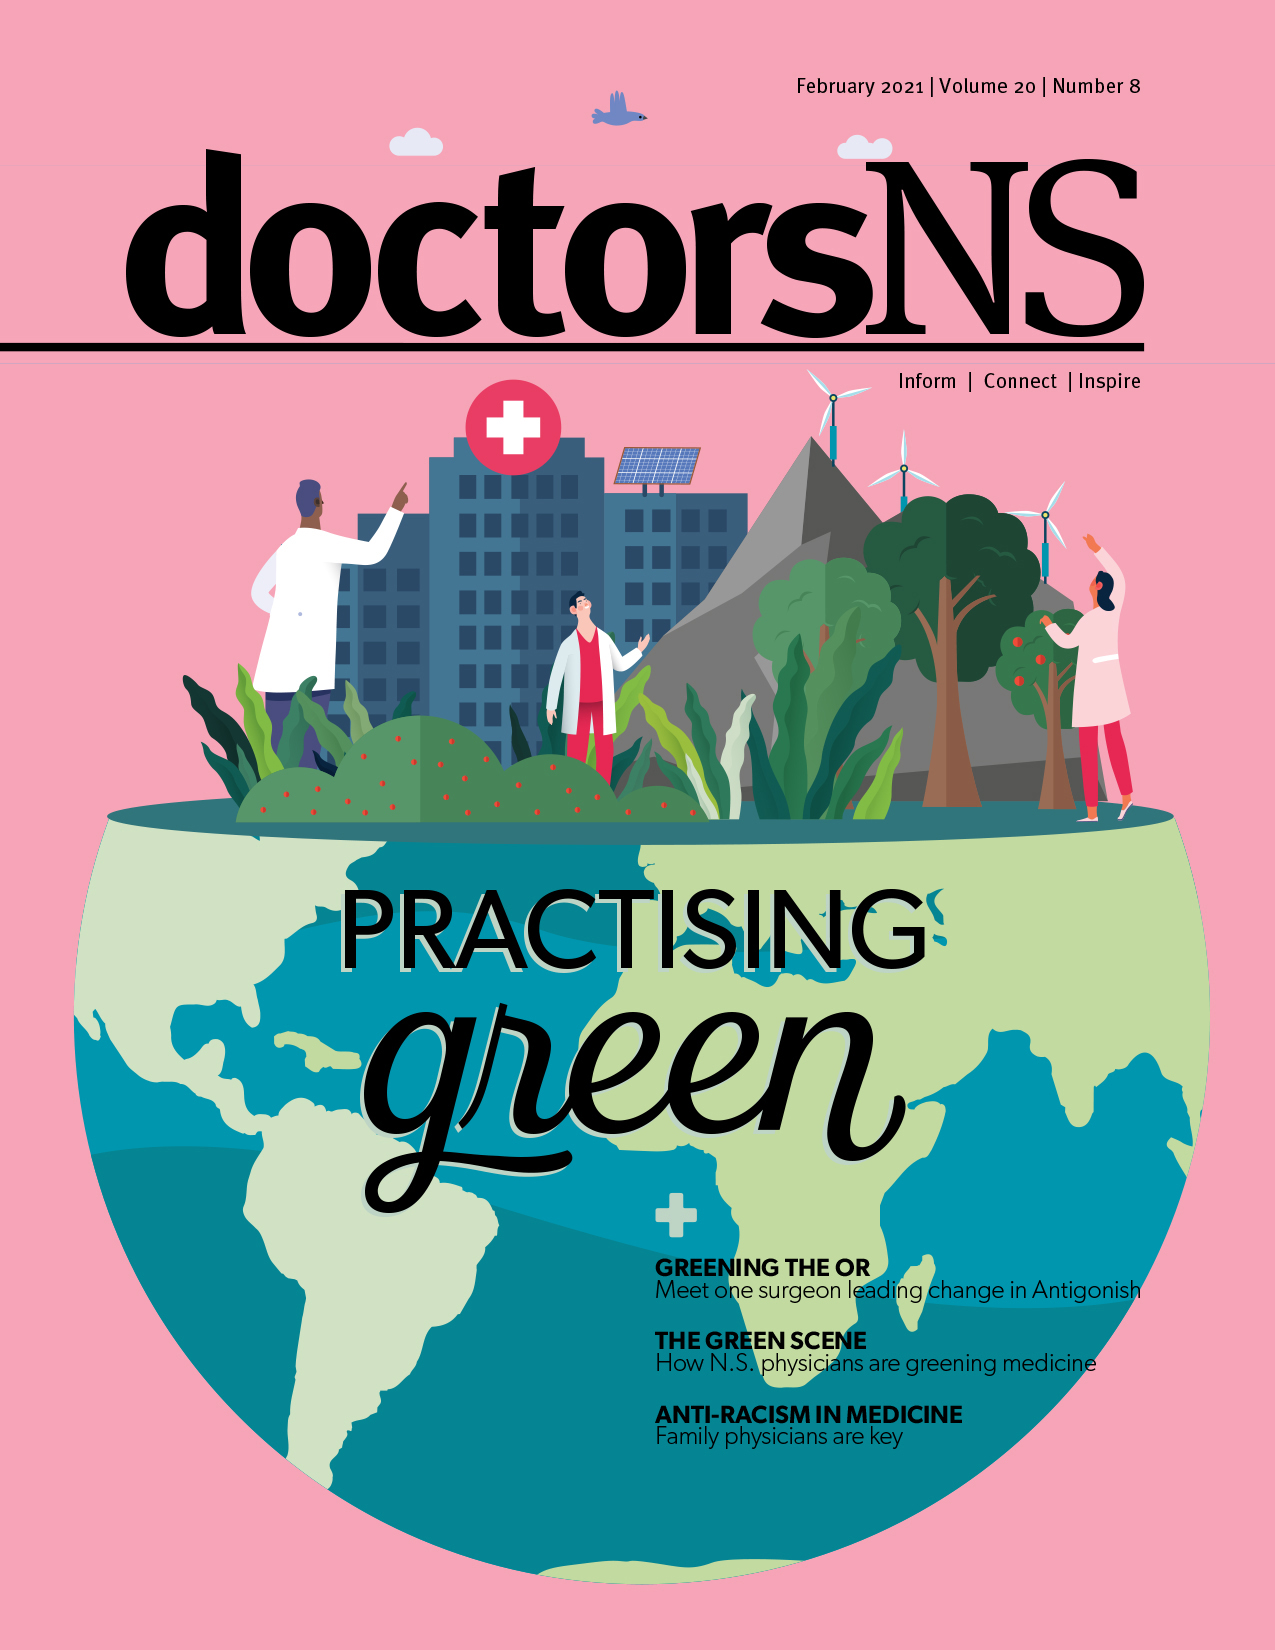 February 2021 cover of the doctorsNS magazine